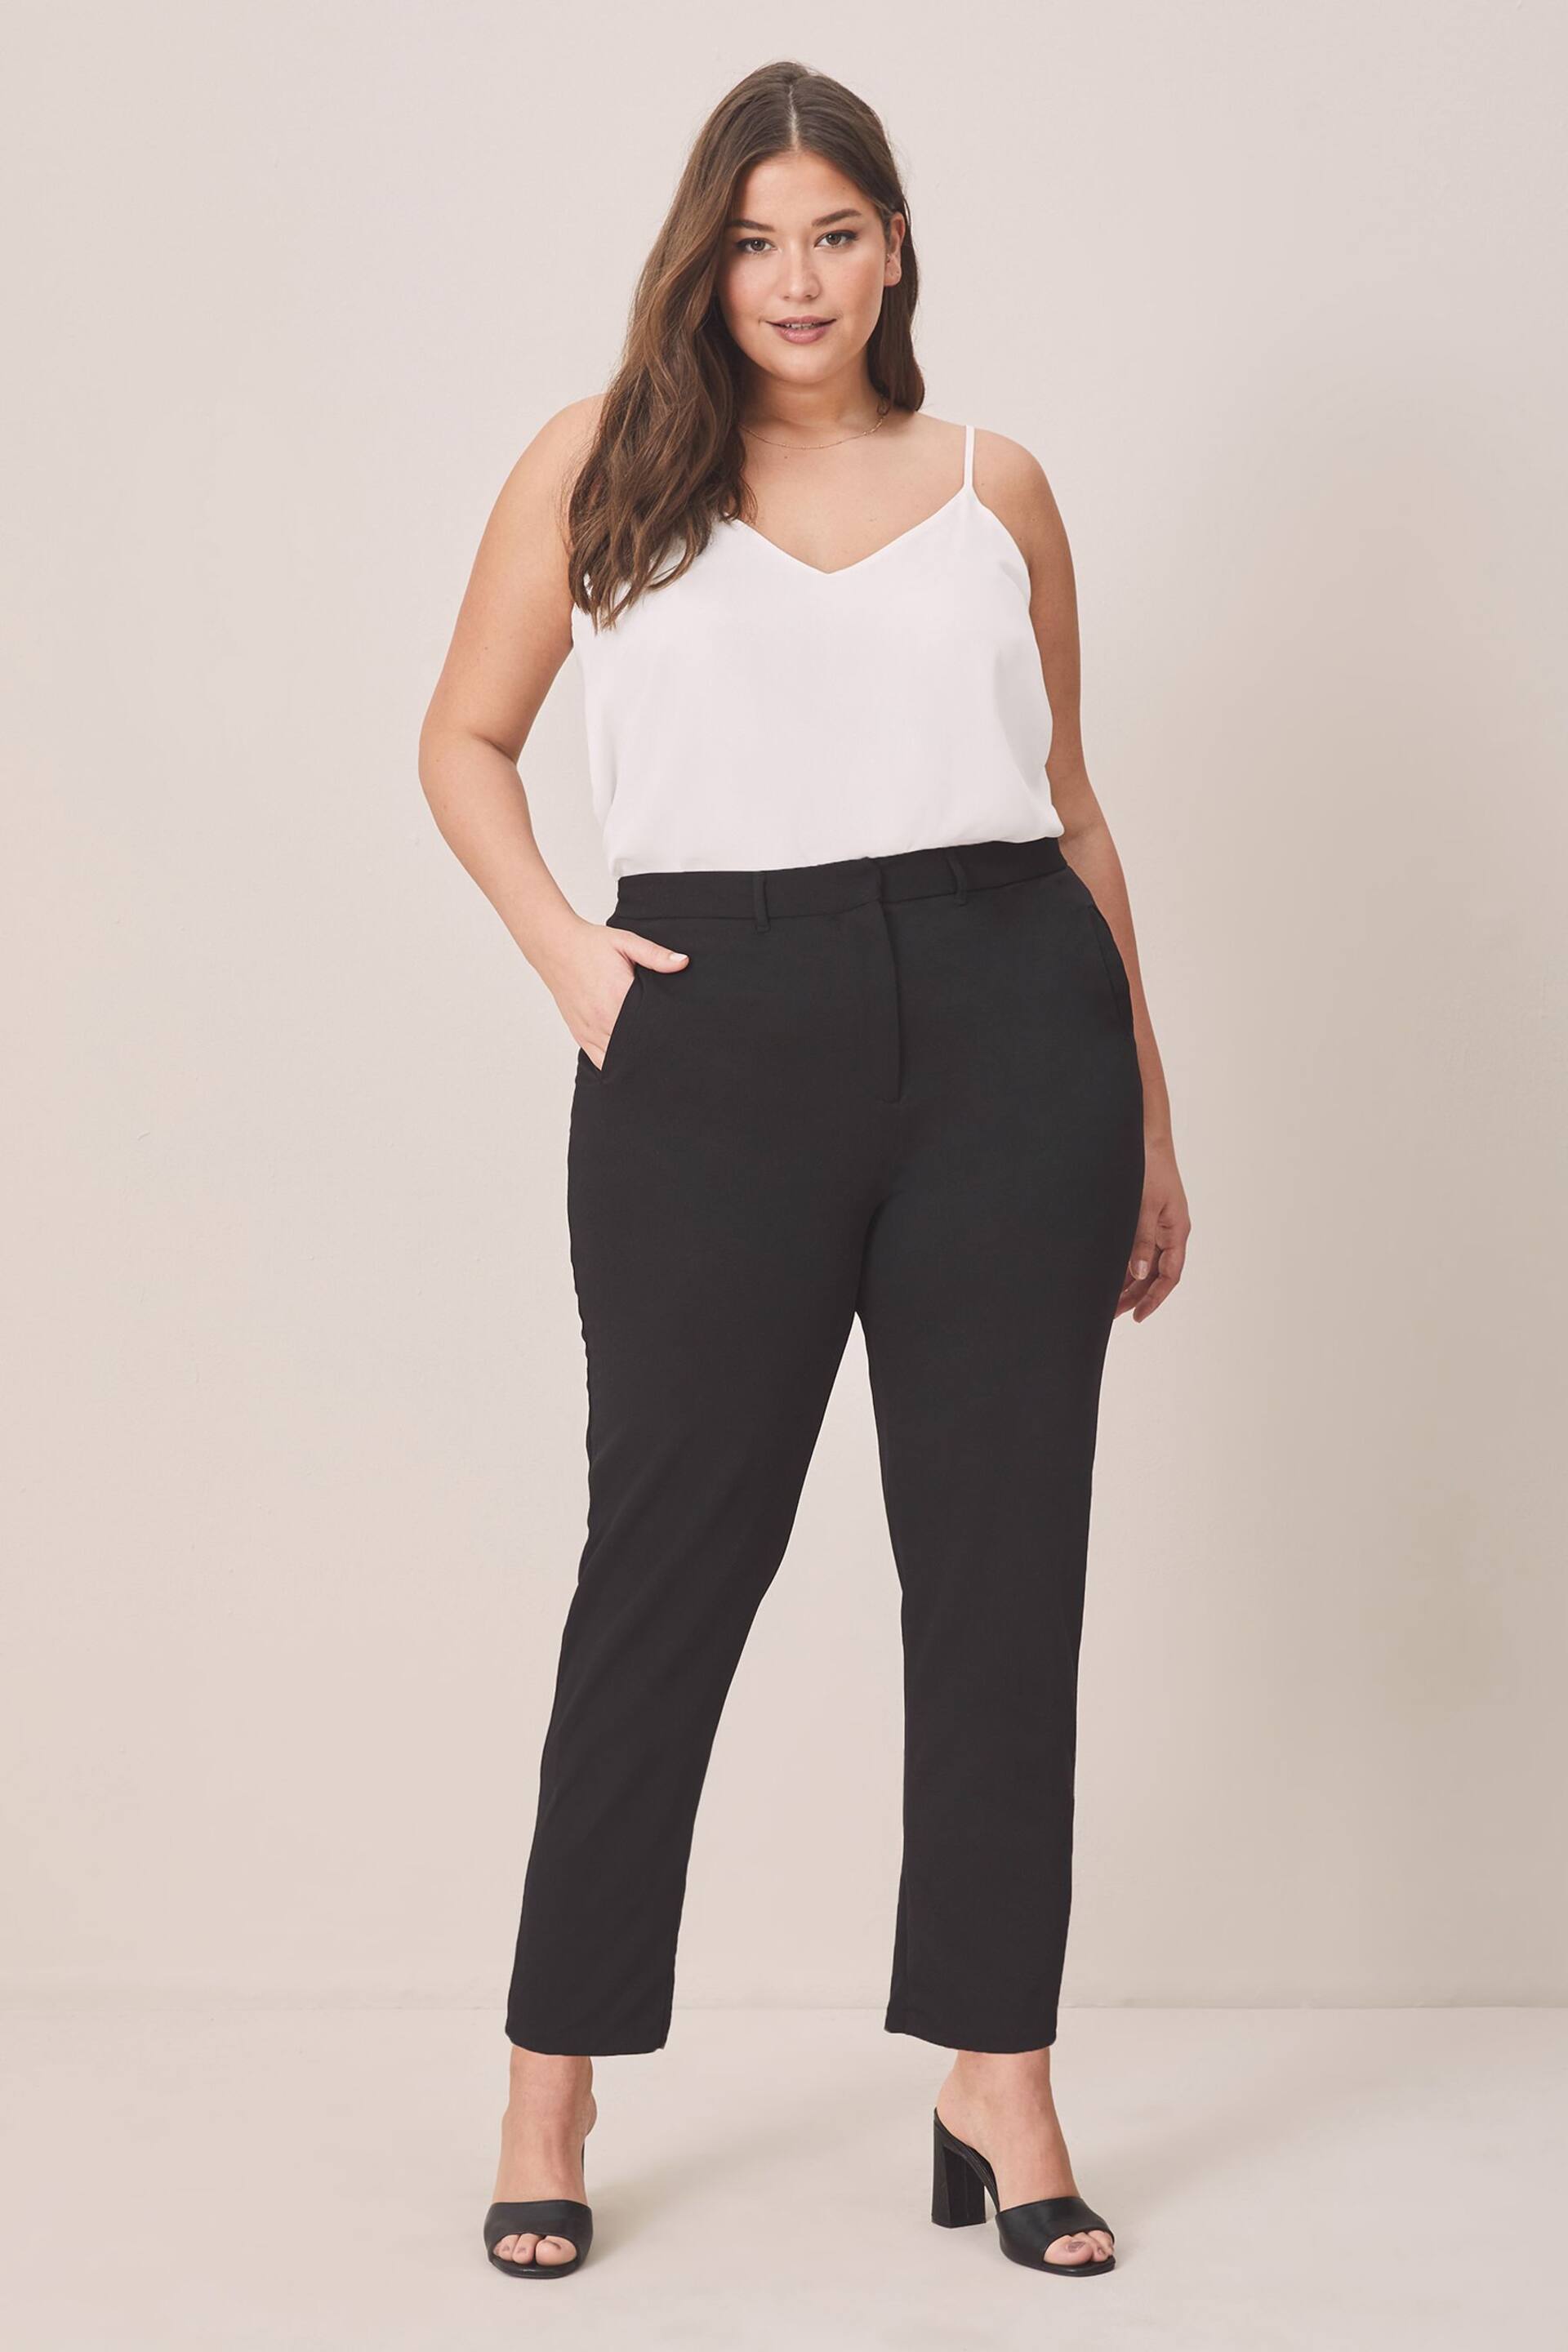 Lipsy Black Curve Smart Tapered Trouser - Image 2 of 4